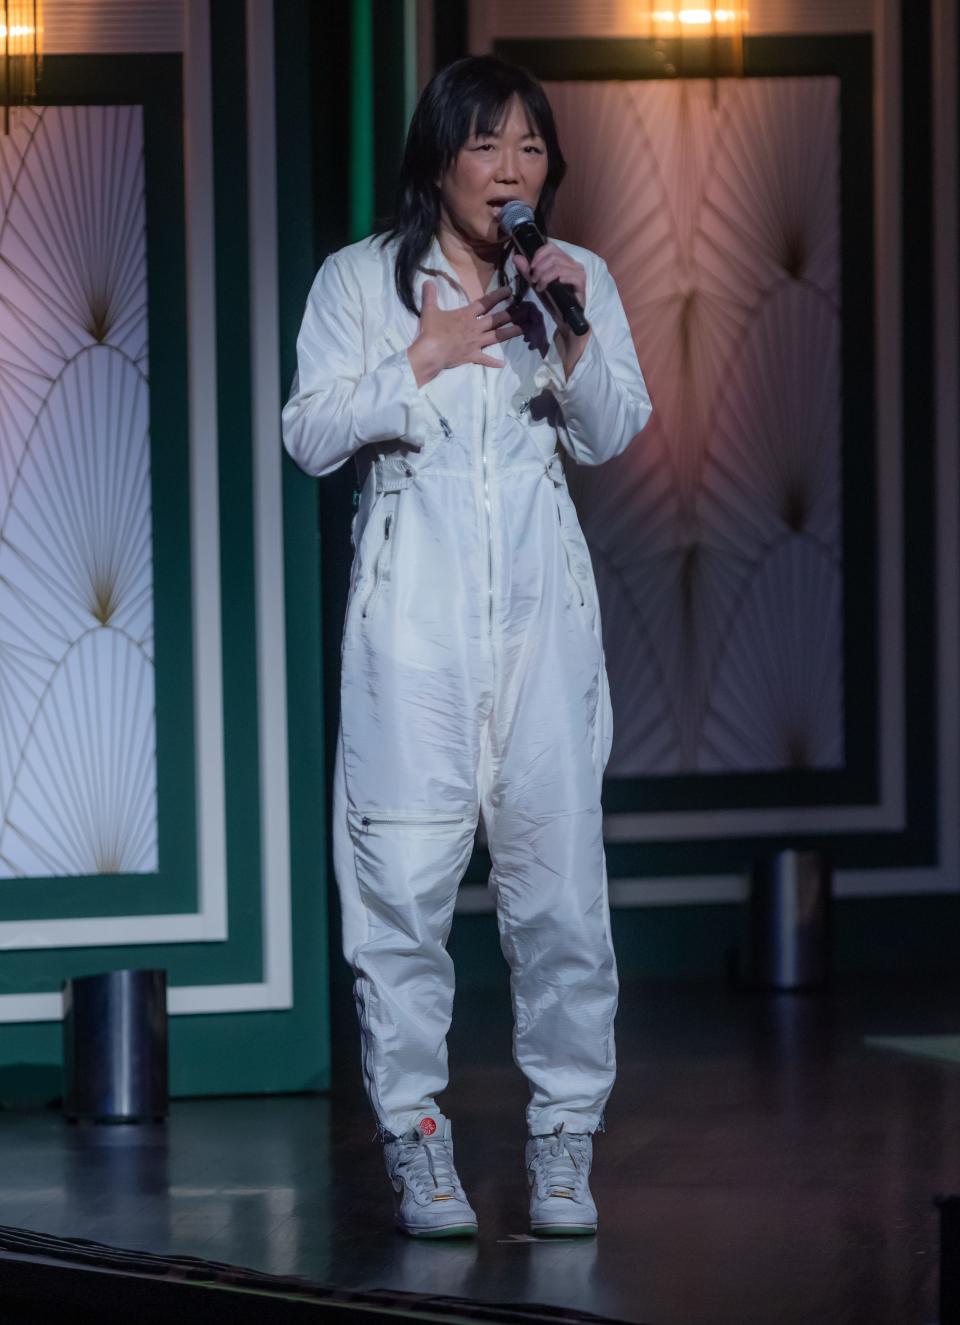 Margaret Cho headlined the comedy festival in 2021.